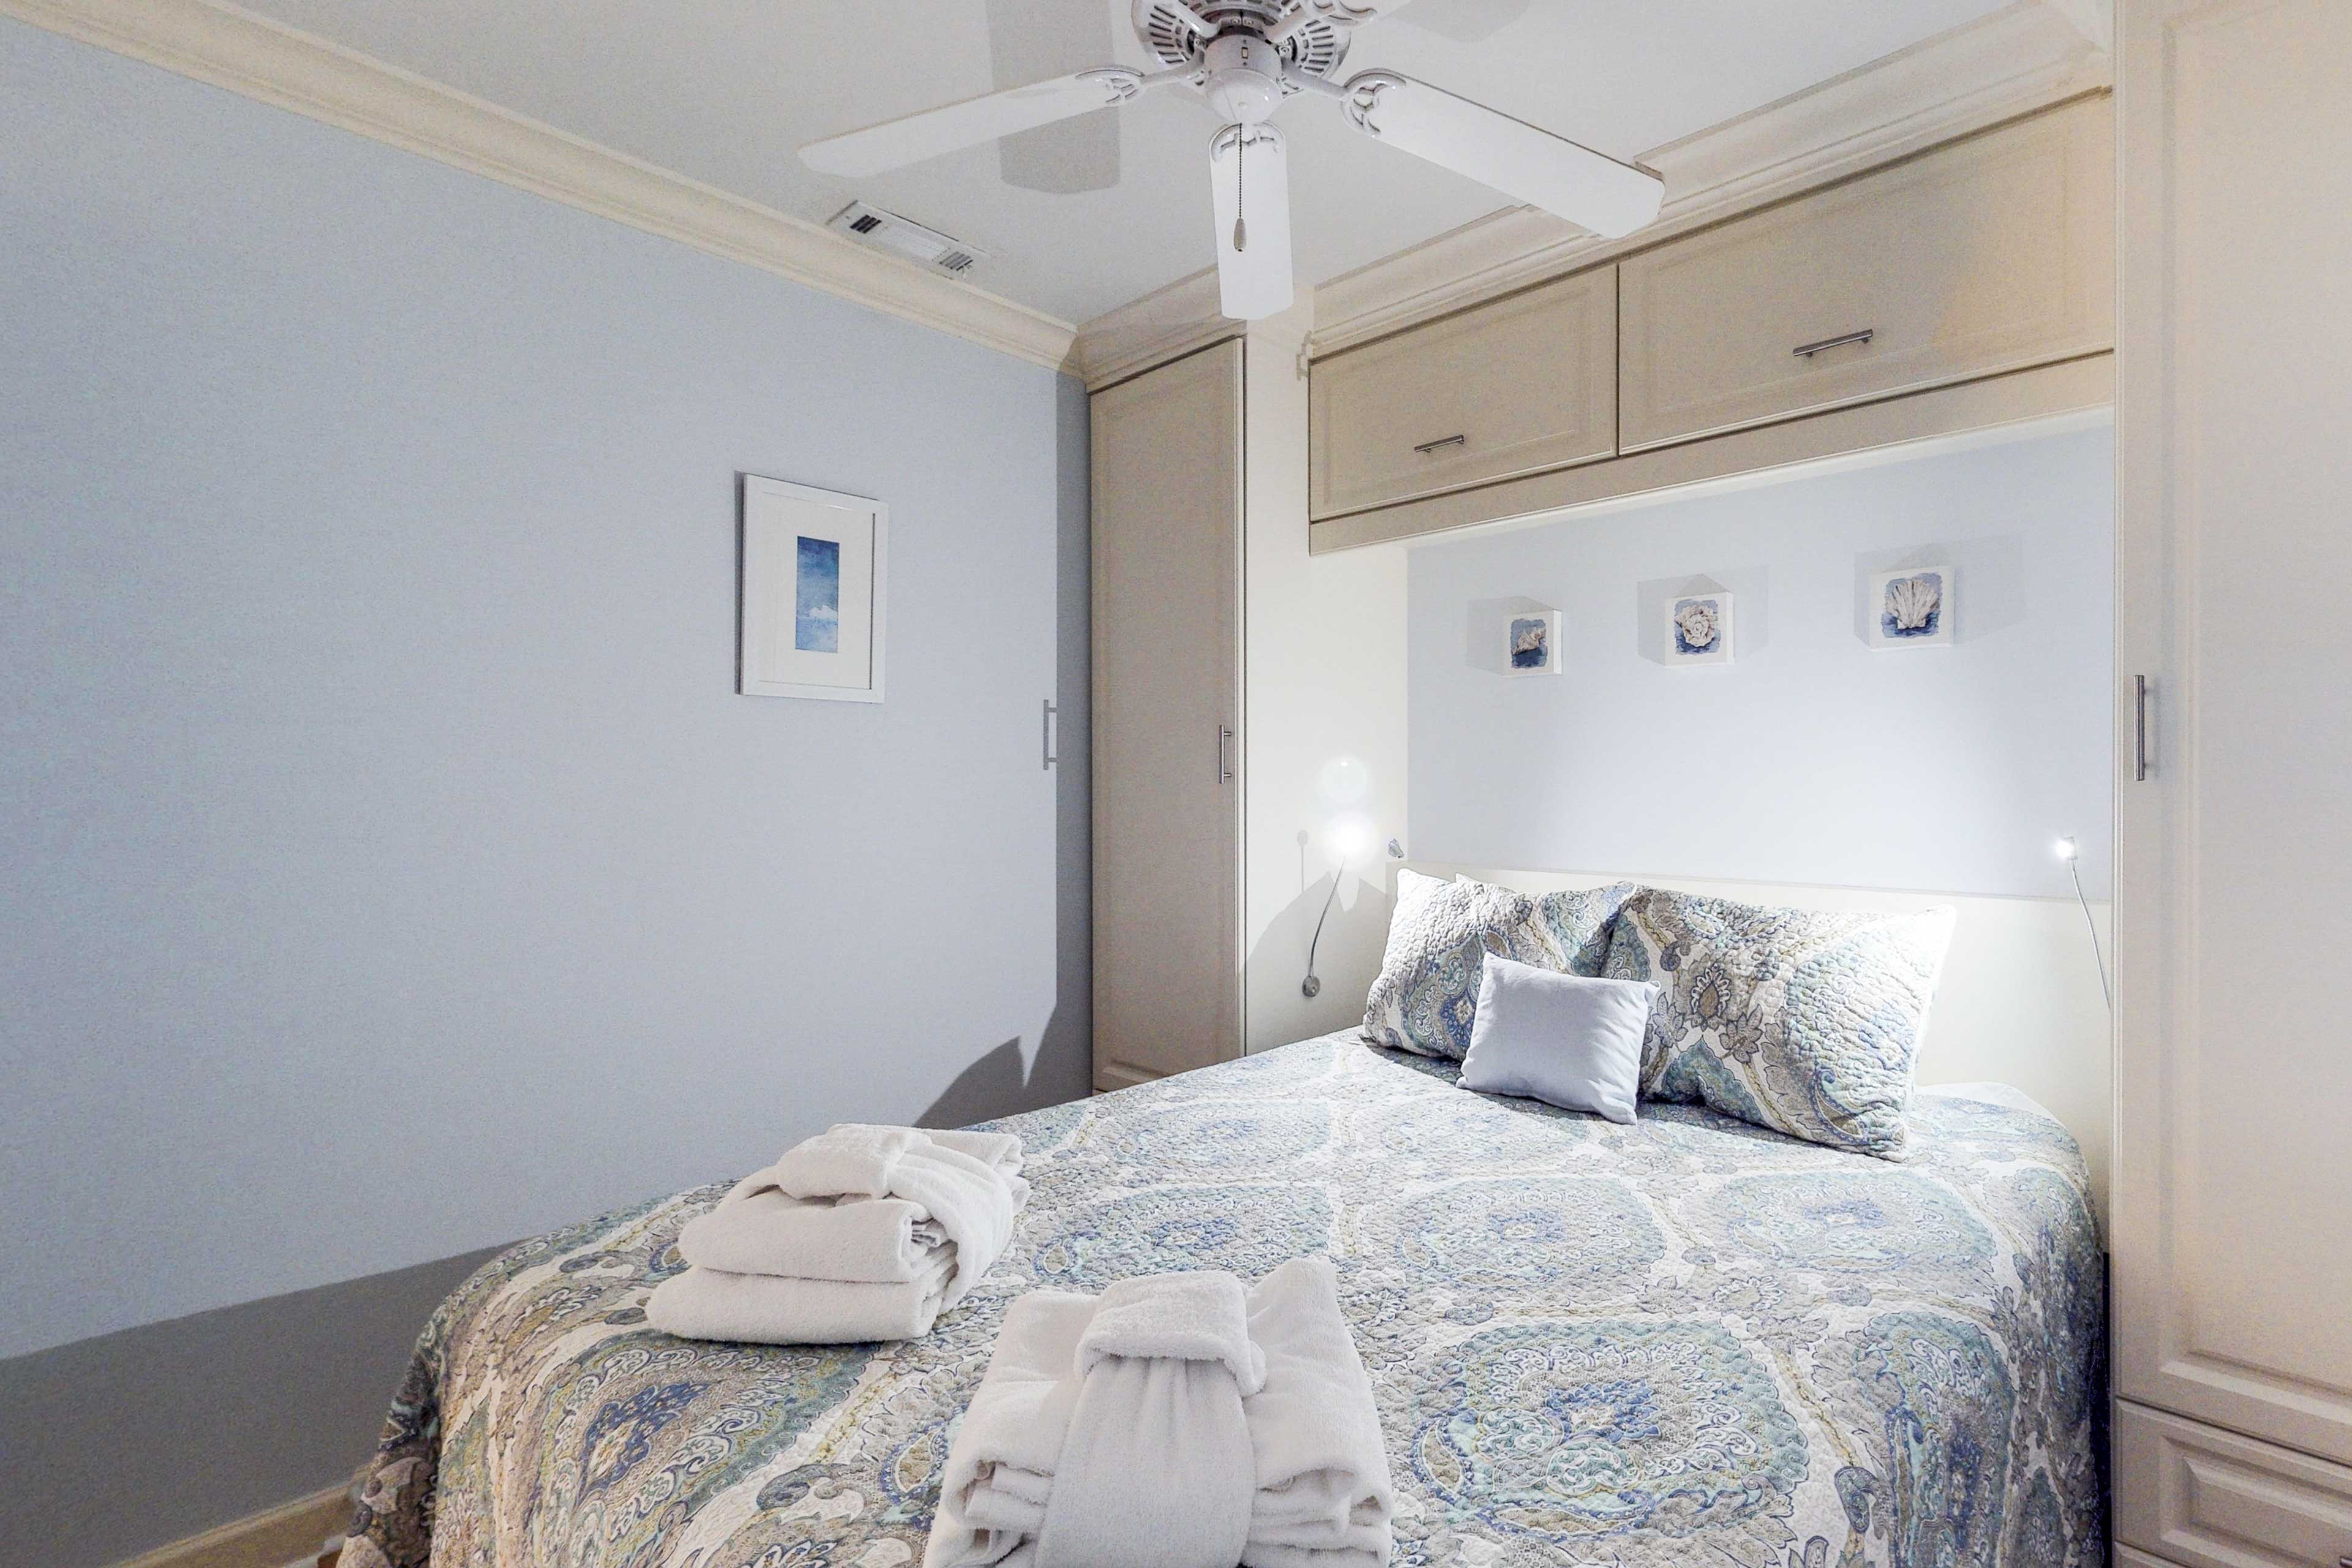 Let the ceiling fan buffer you to sleep each night.